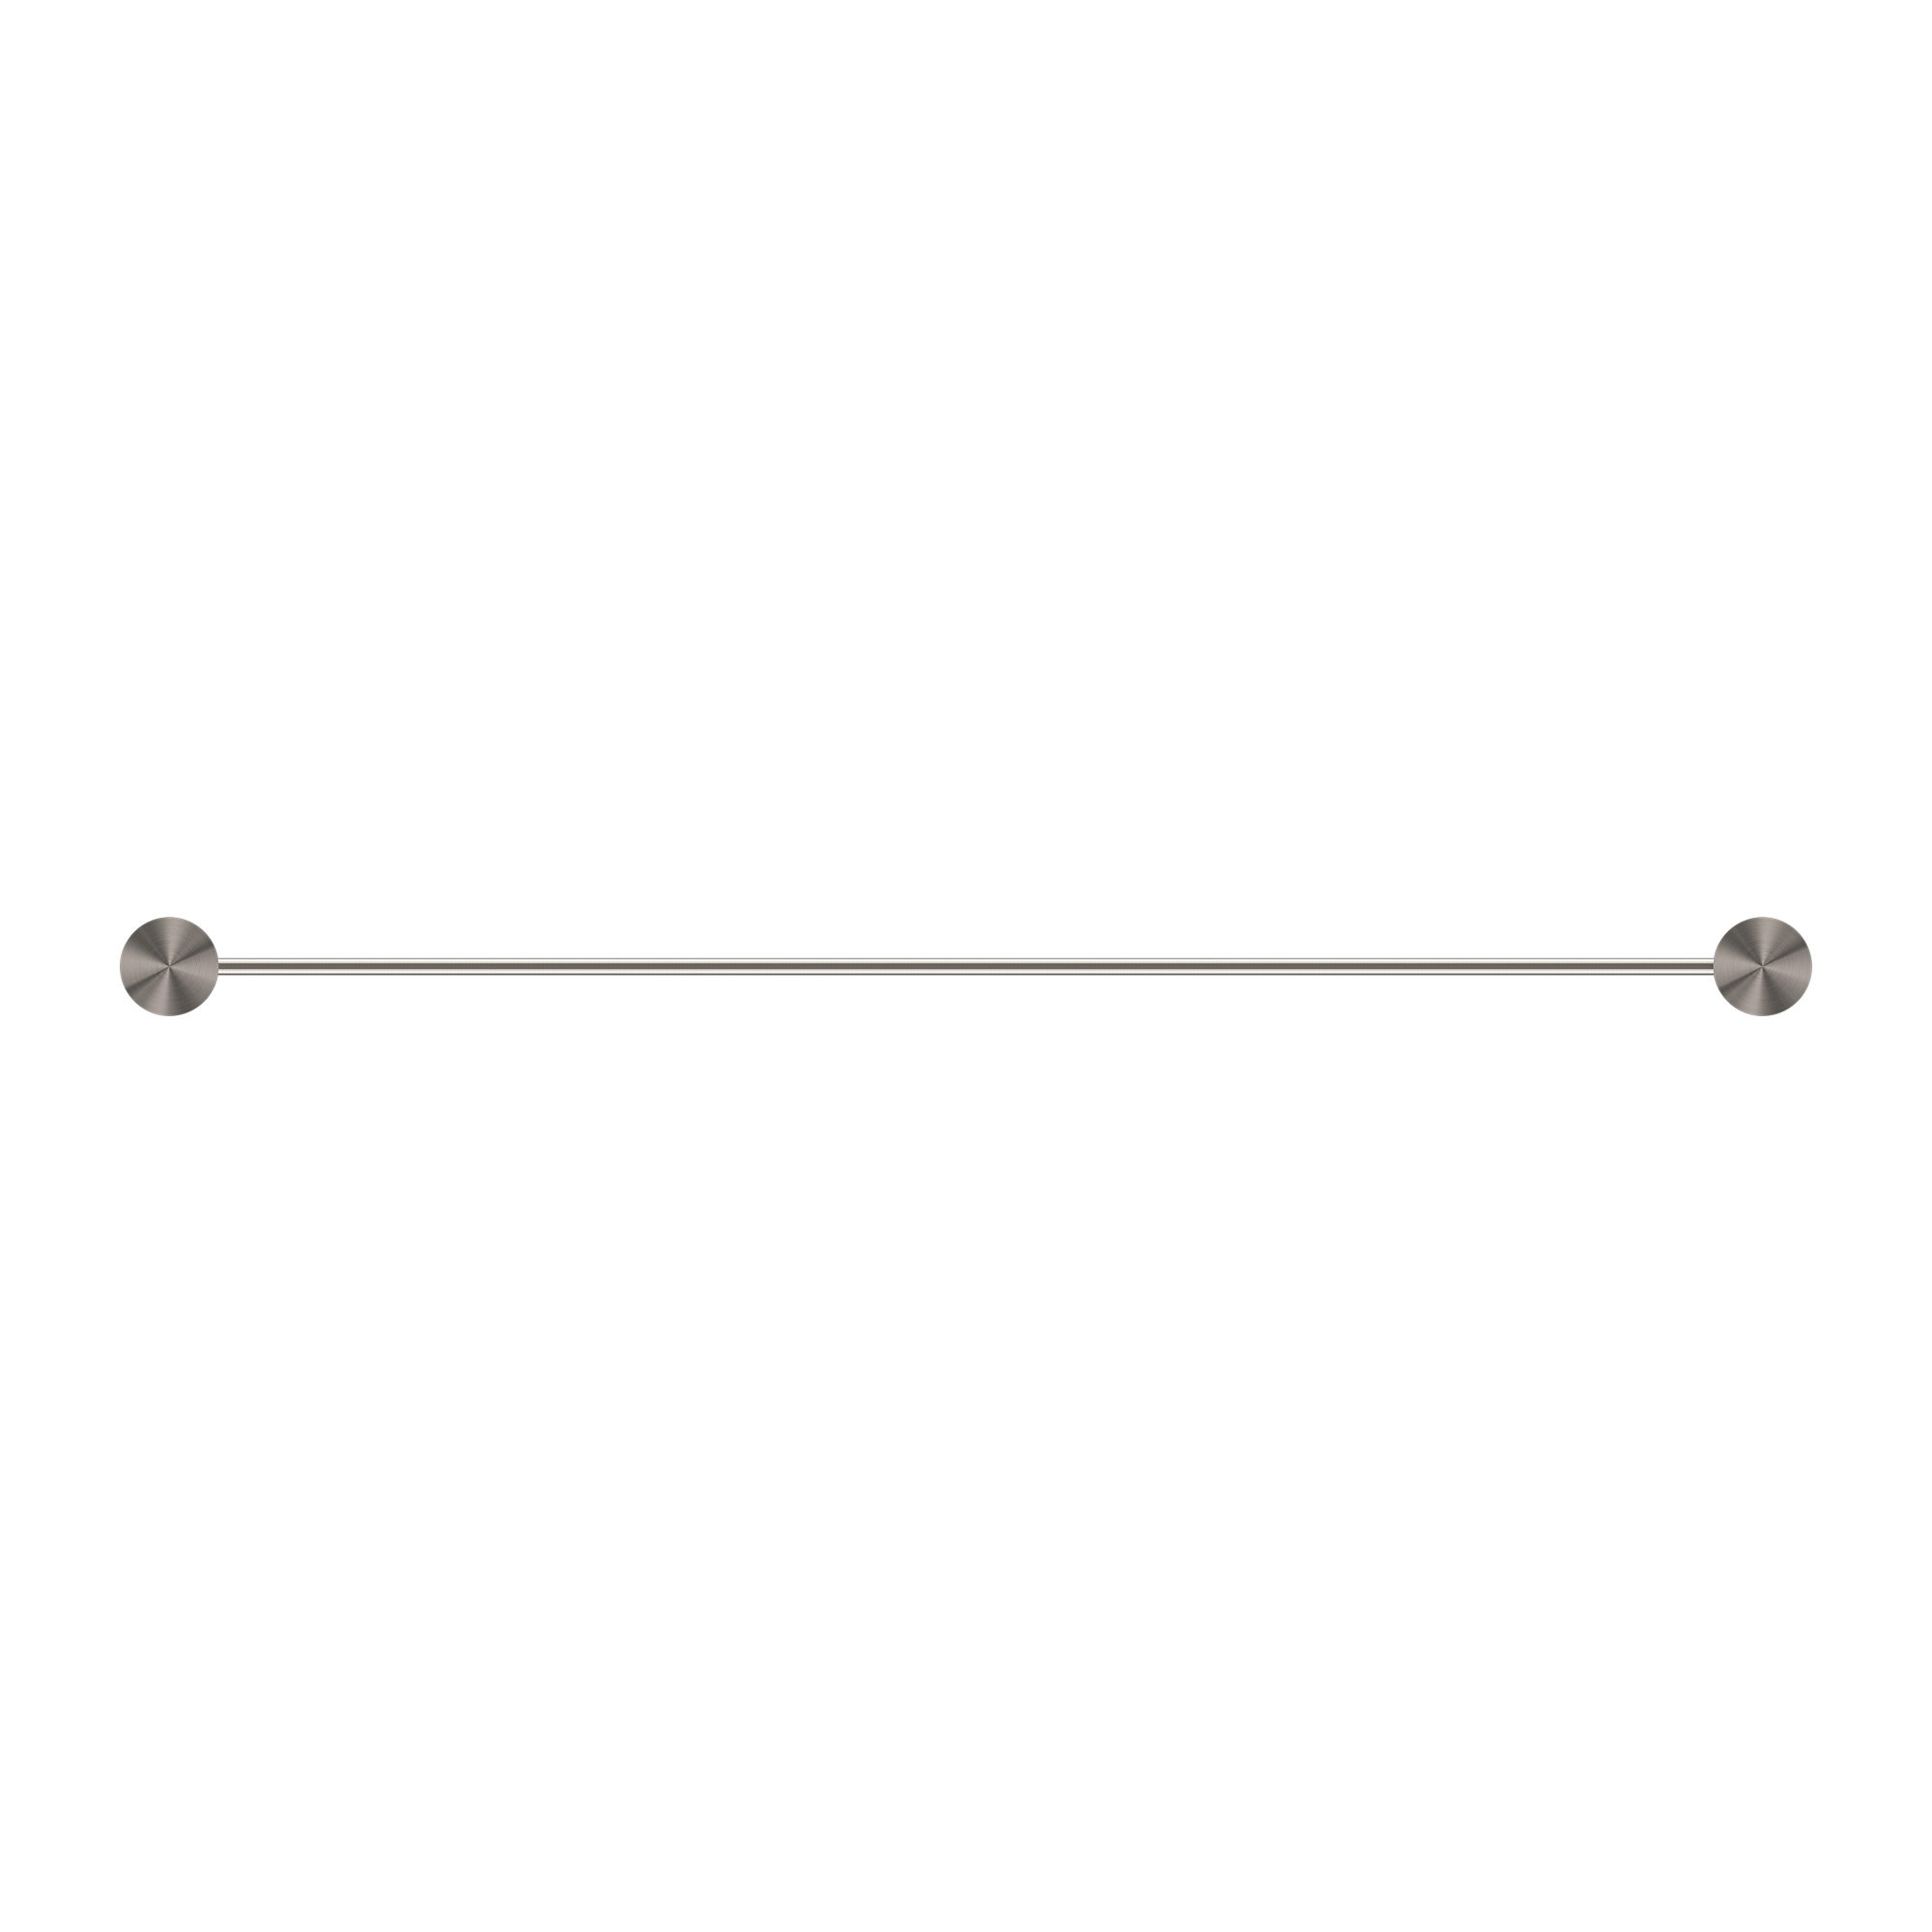 NERO OPAL NON-HEATED DOUBLE TOWEL RAIL BRUSHED NICKEL (AVAILABLE IN 600MM AND 800MM)